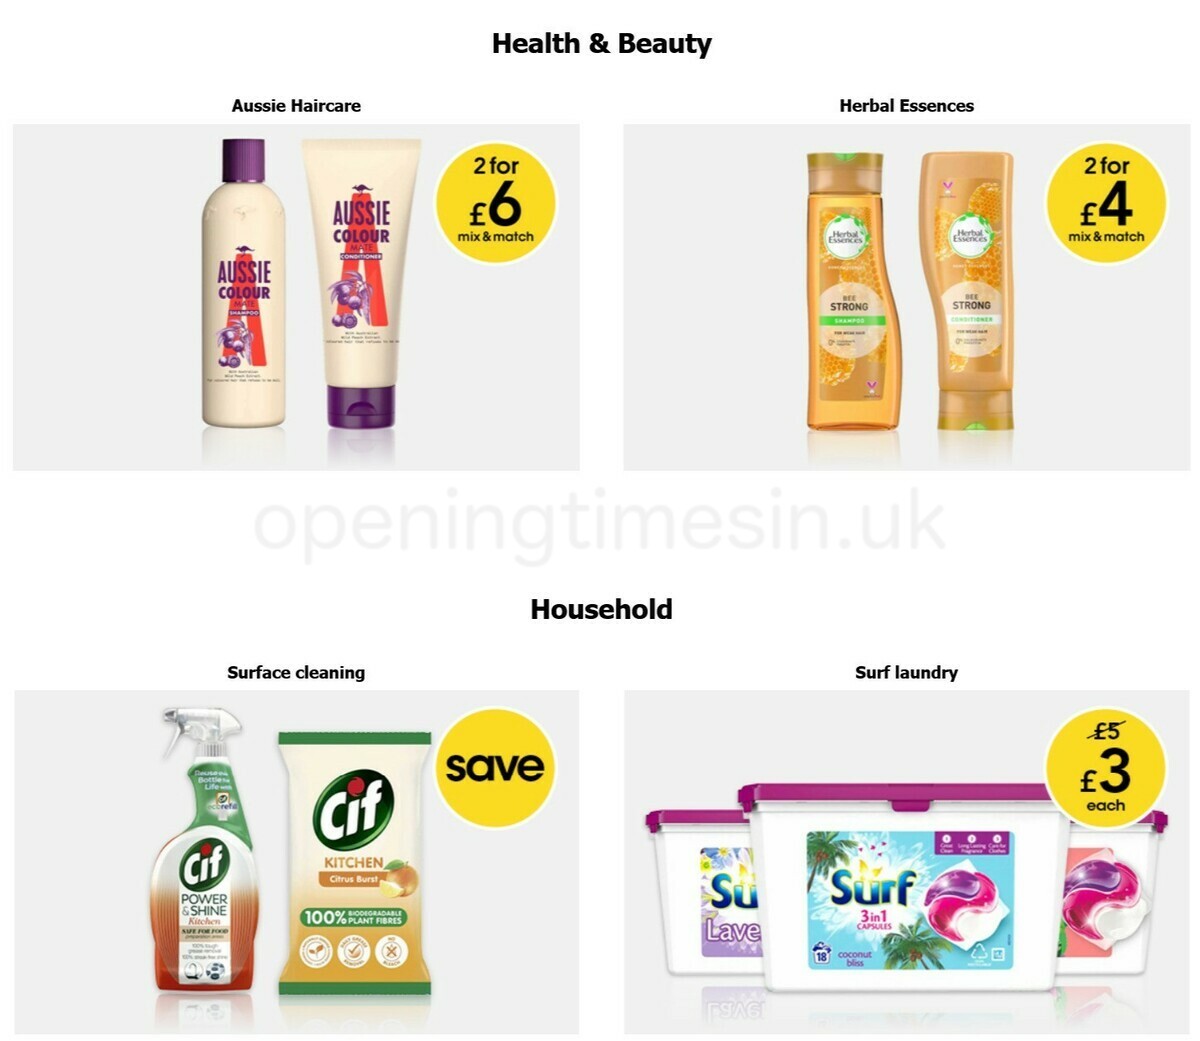 Wilko Offers from 22 May